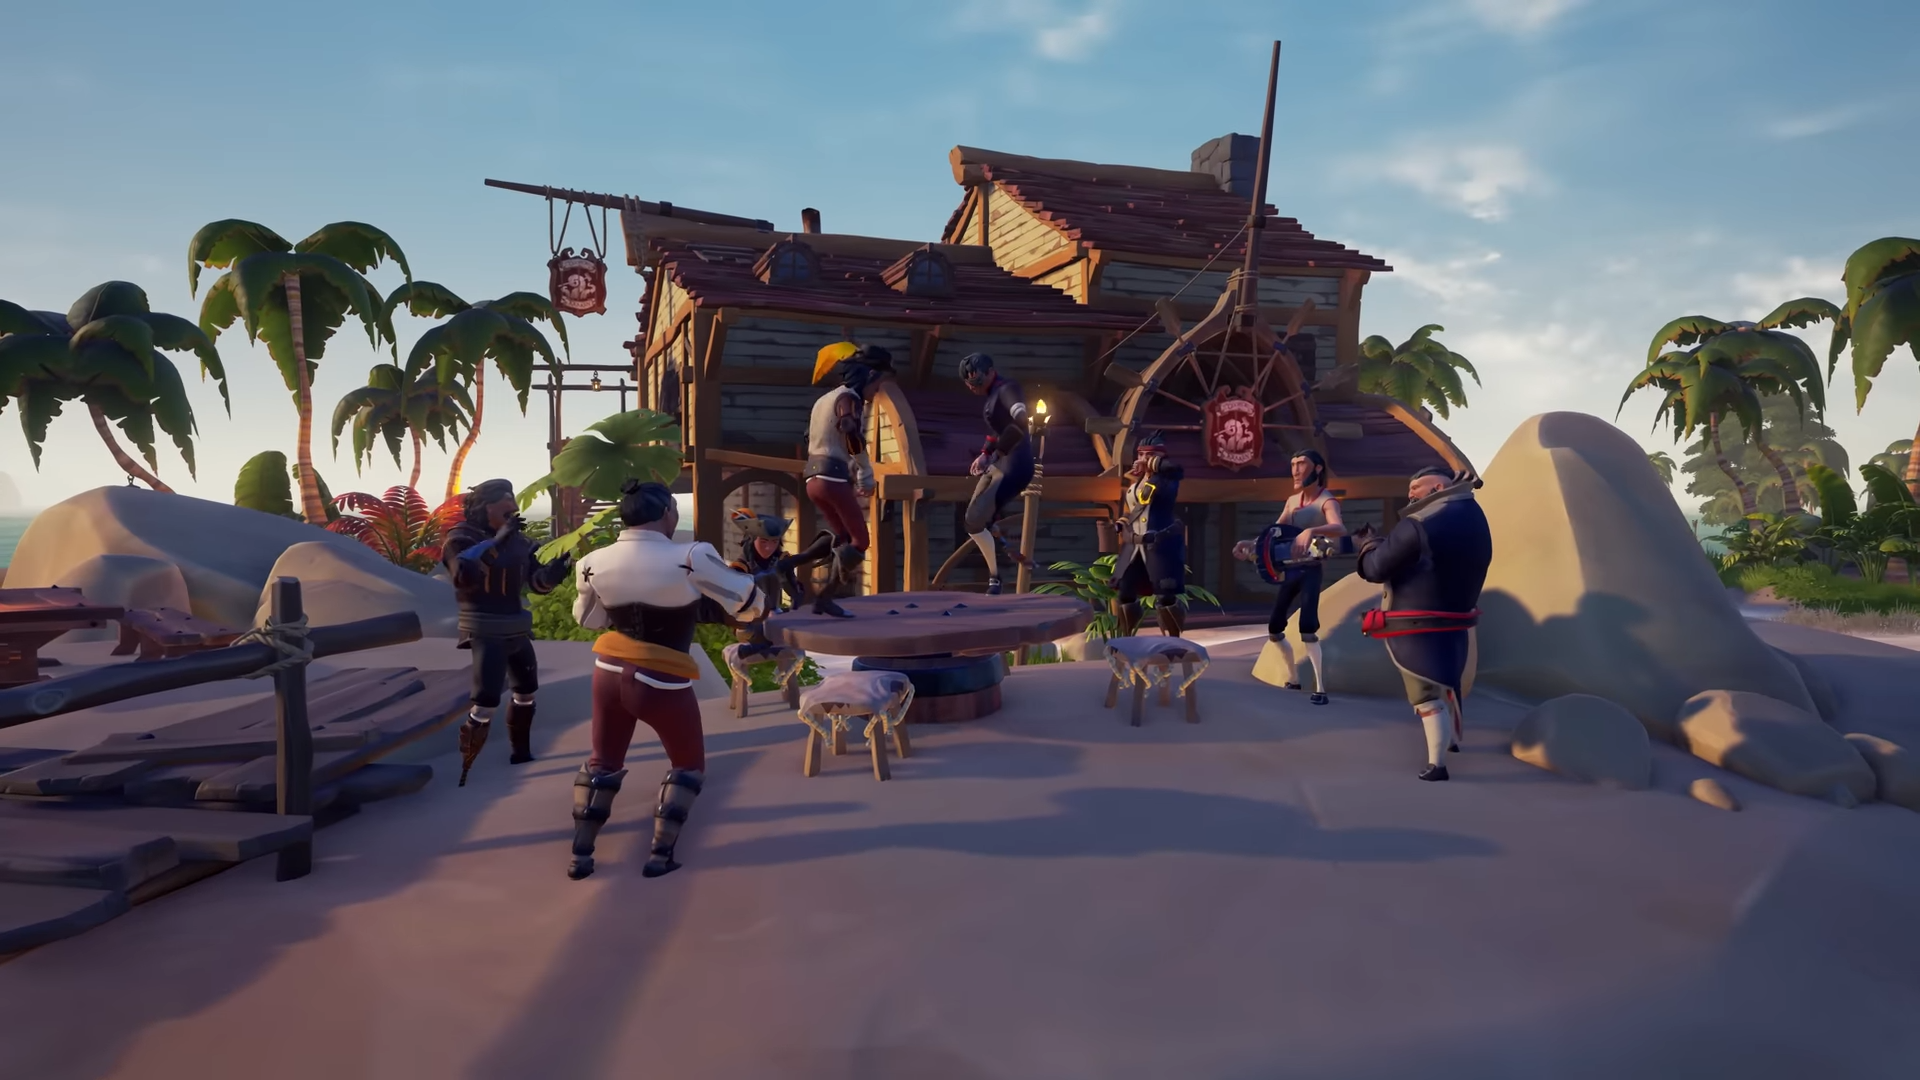 Sea of Thieves System Requirements